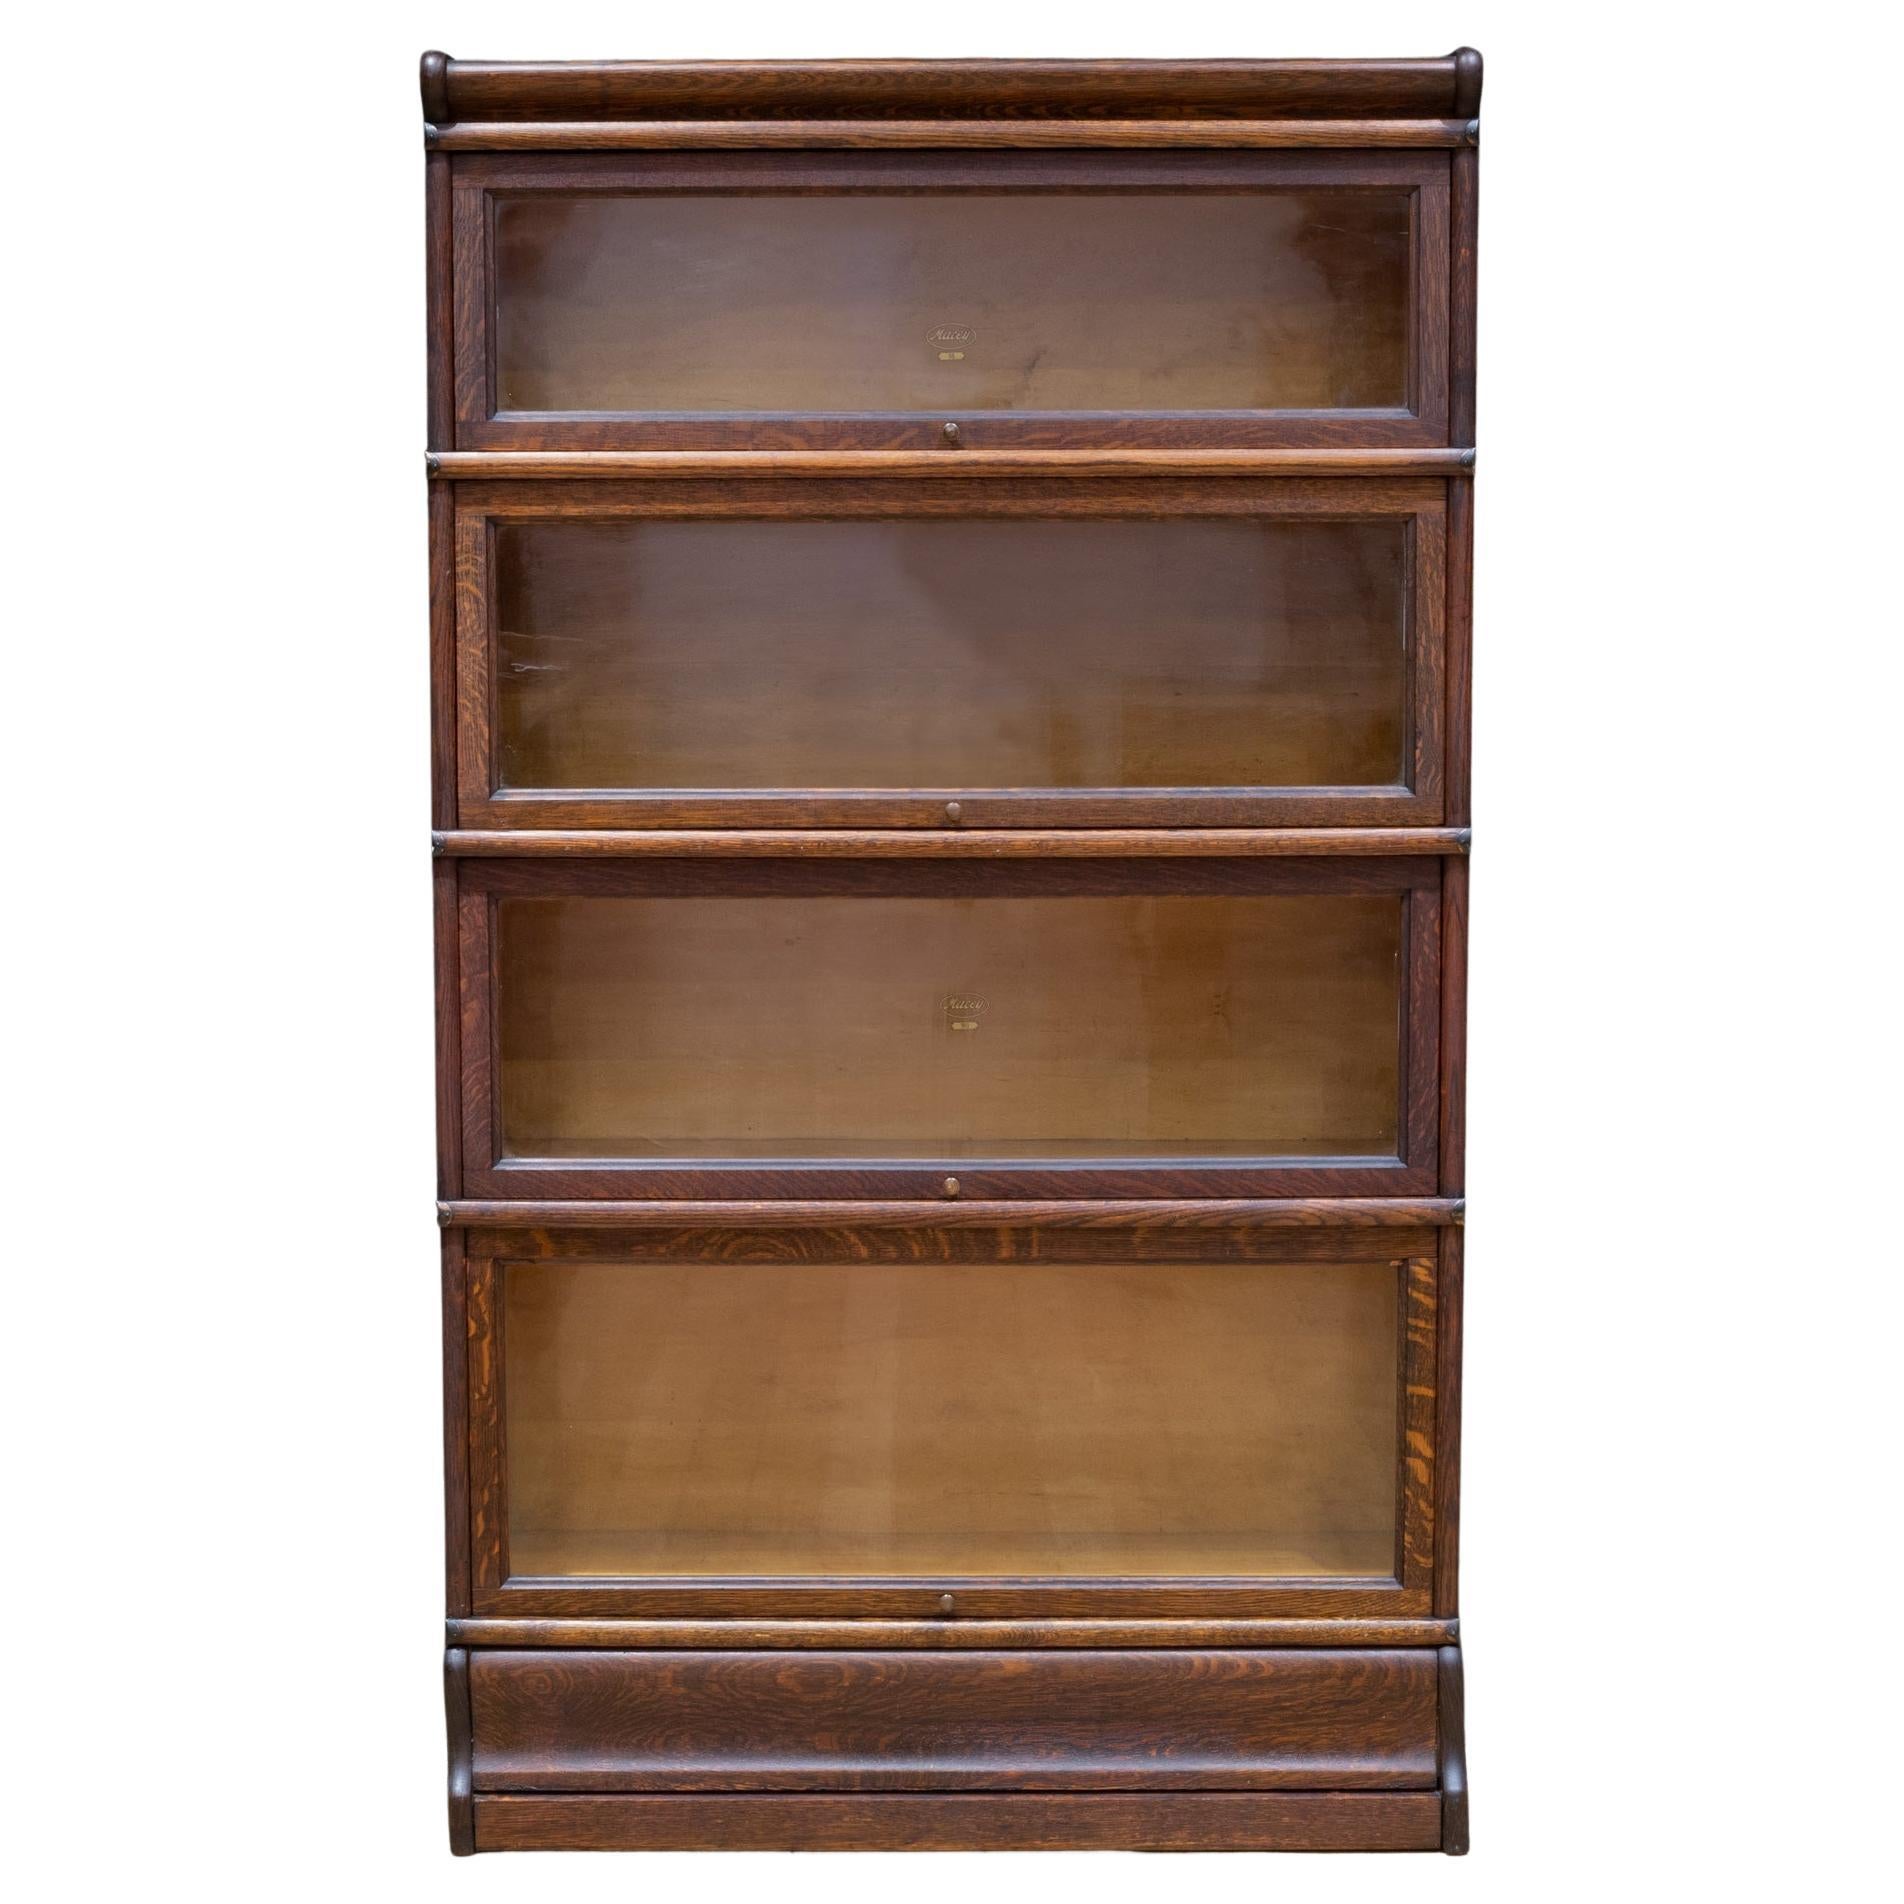 Antique Macey Furniture 4 Stack Lawyer's Bookcase c.1910 For Sale